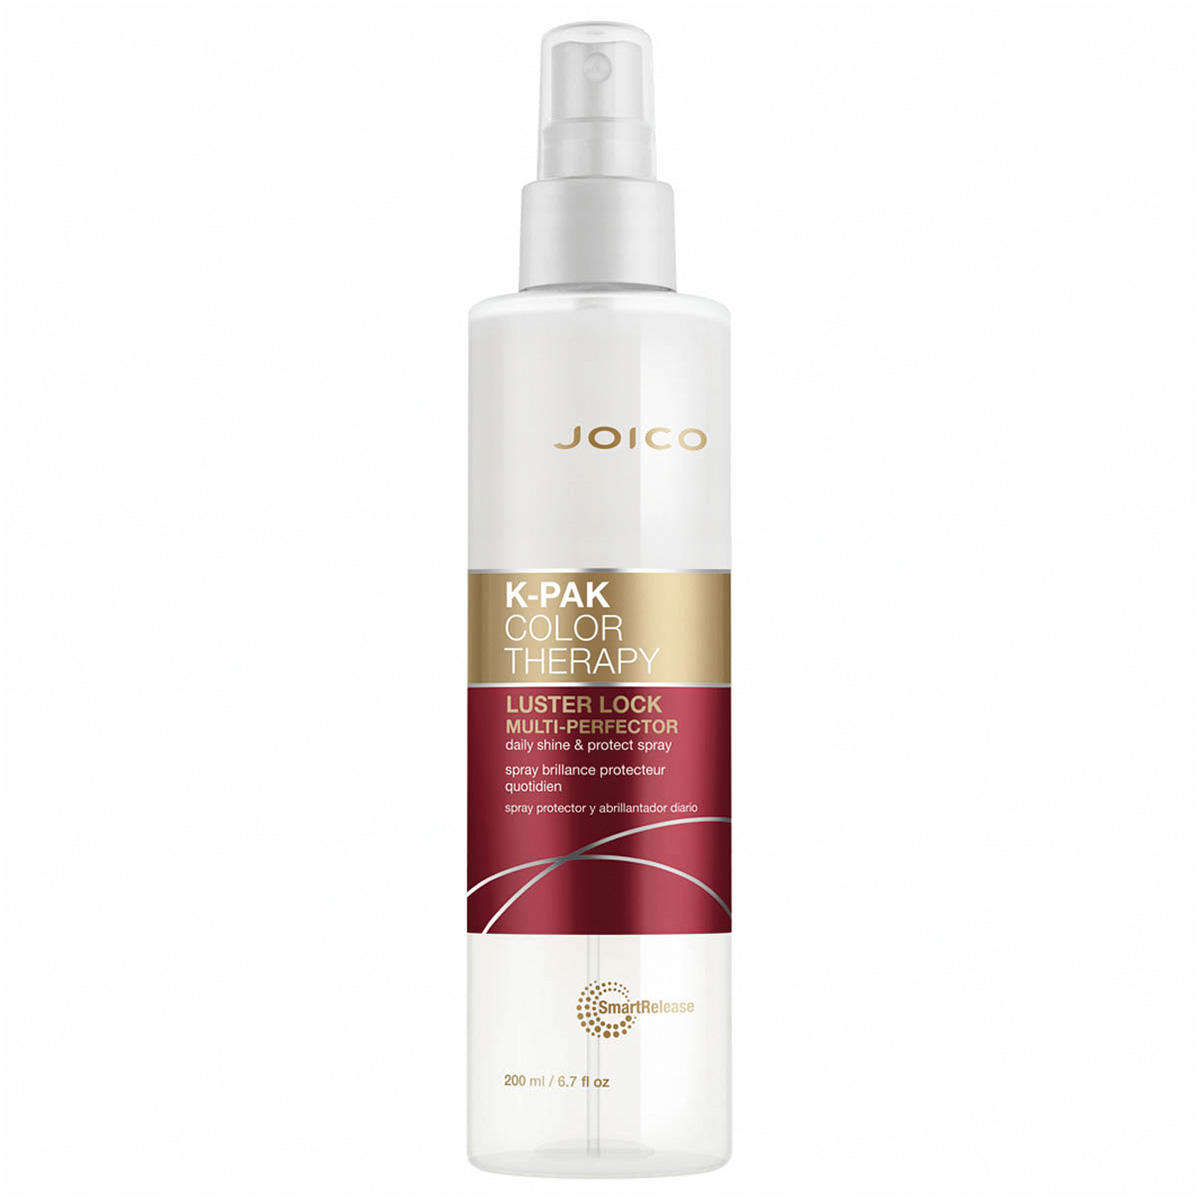 joico k-pak color therapy luster lock multi-perfector daily shine & protect spray 200 ml